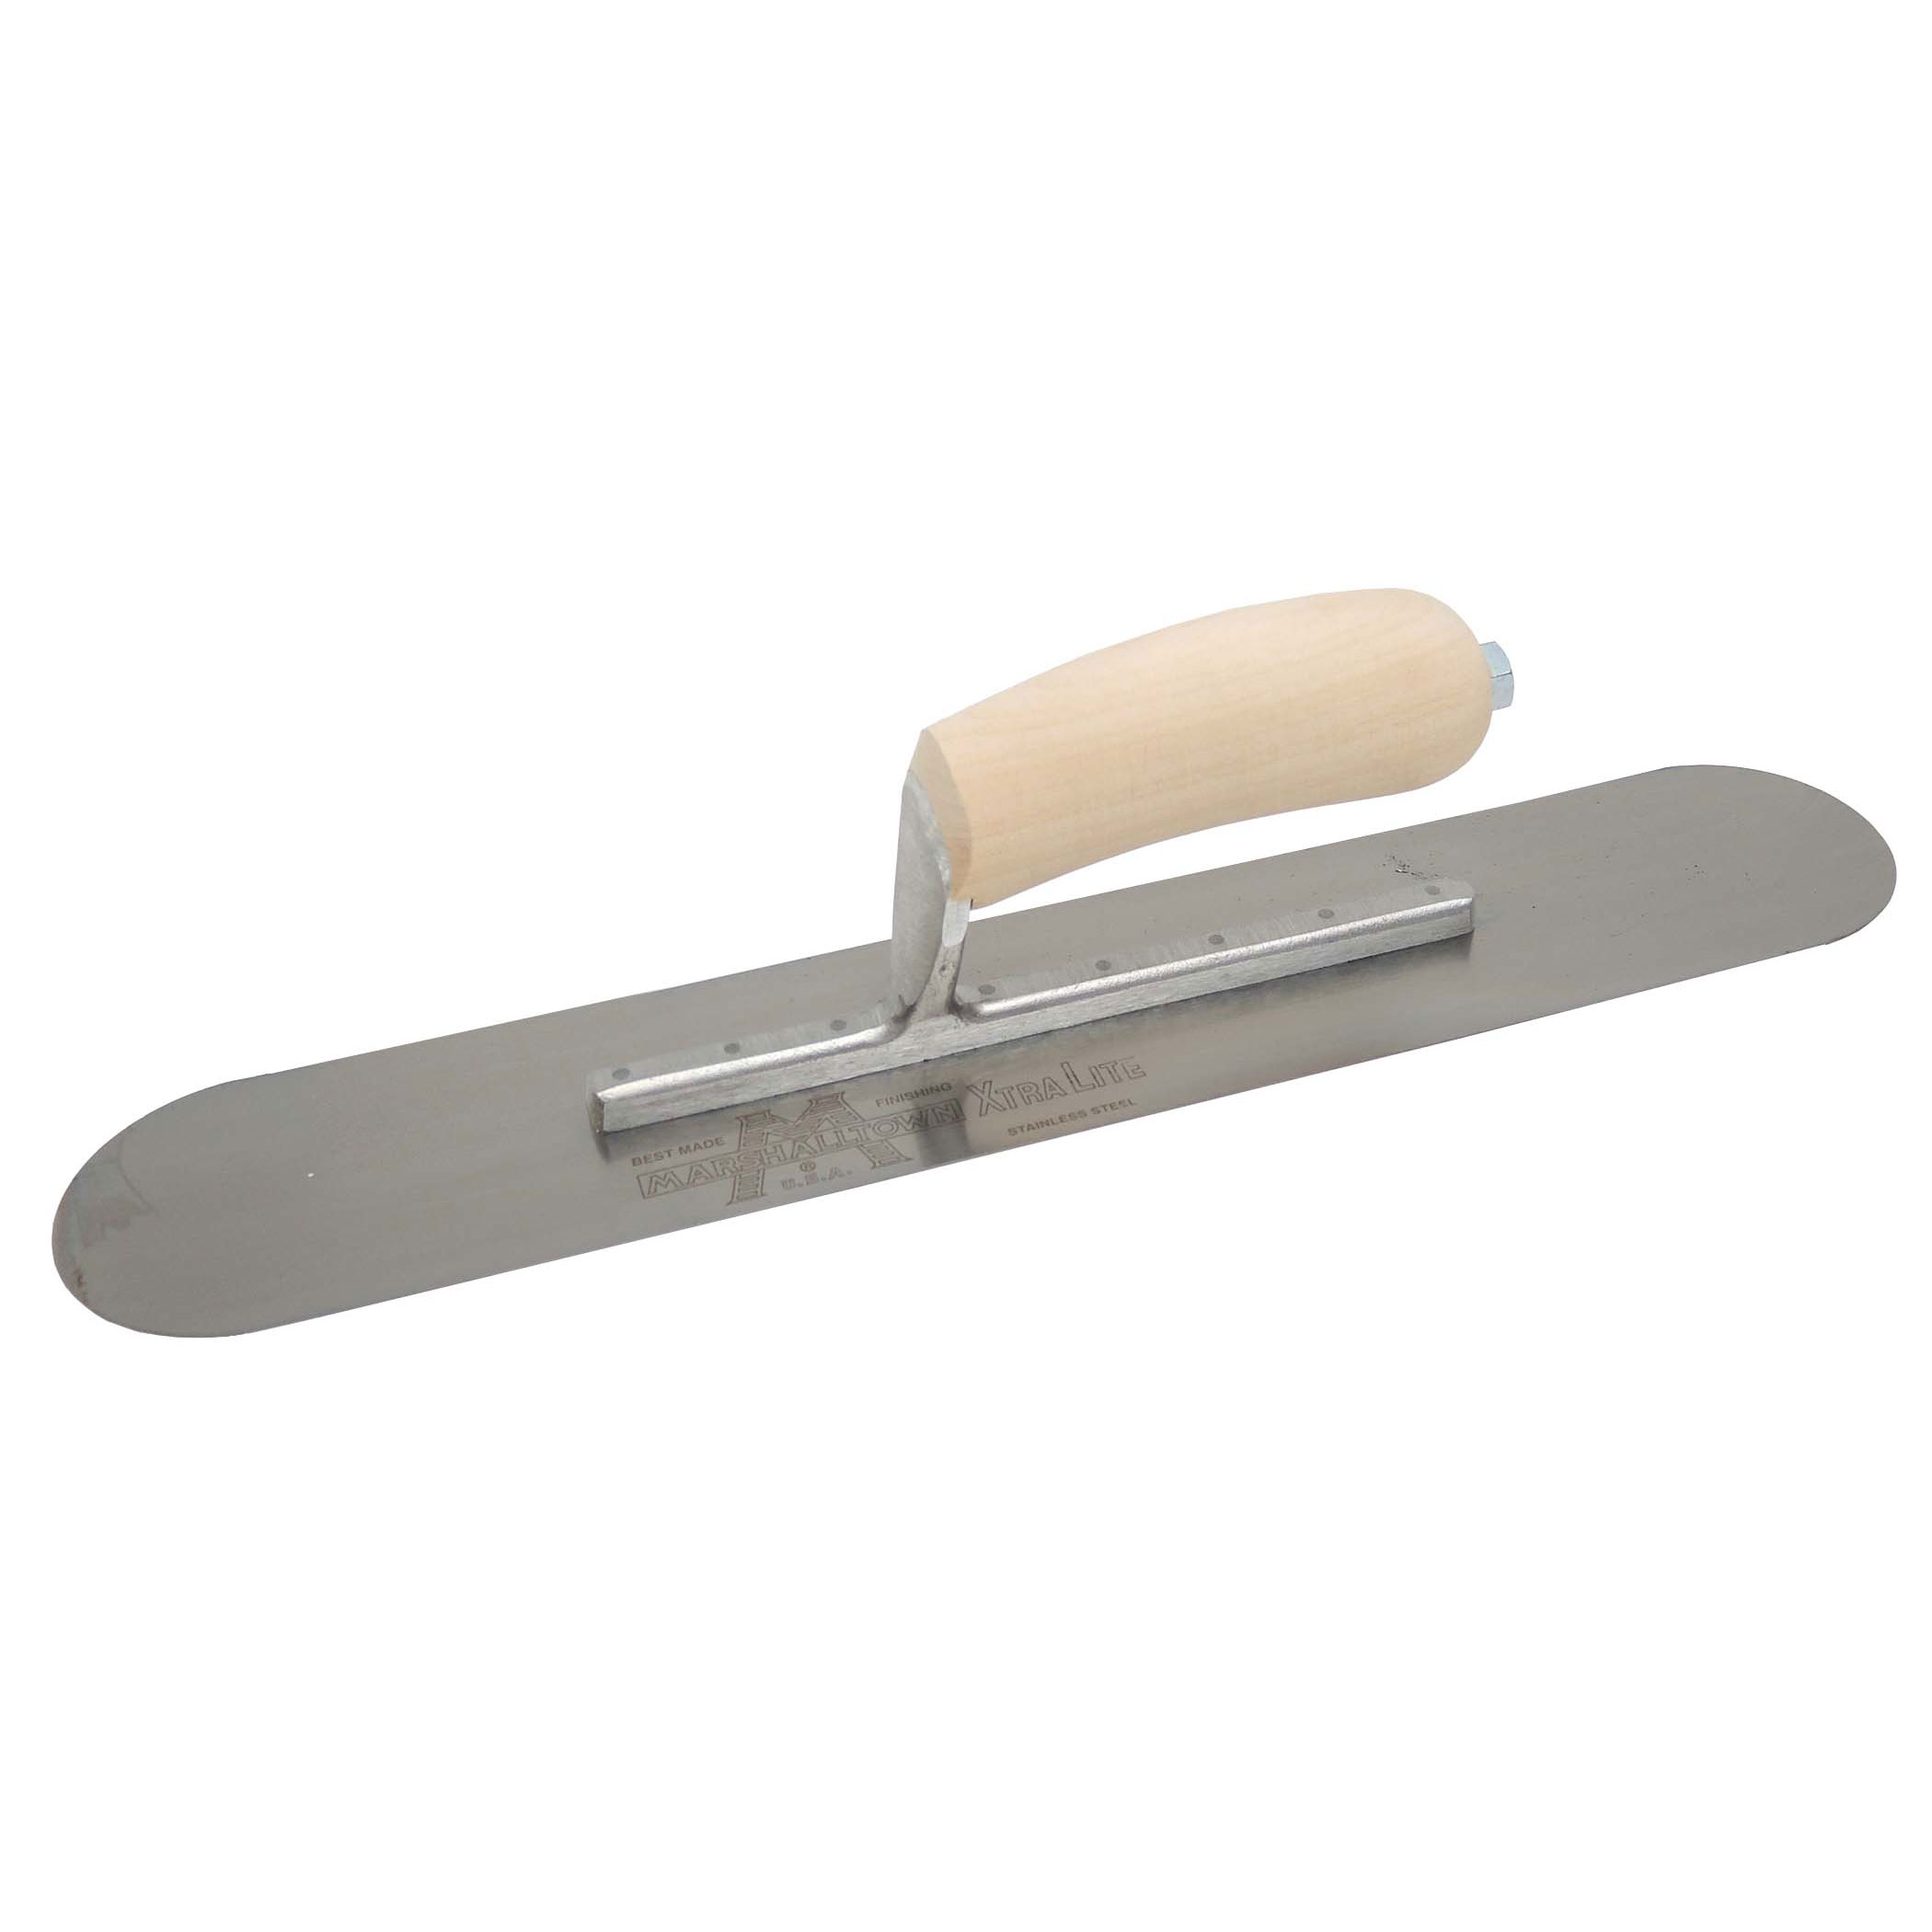 Marshalltown SP163SS 16in x 3in Stainless Steel Pool Trowel with Wood Handle SP163SS